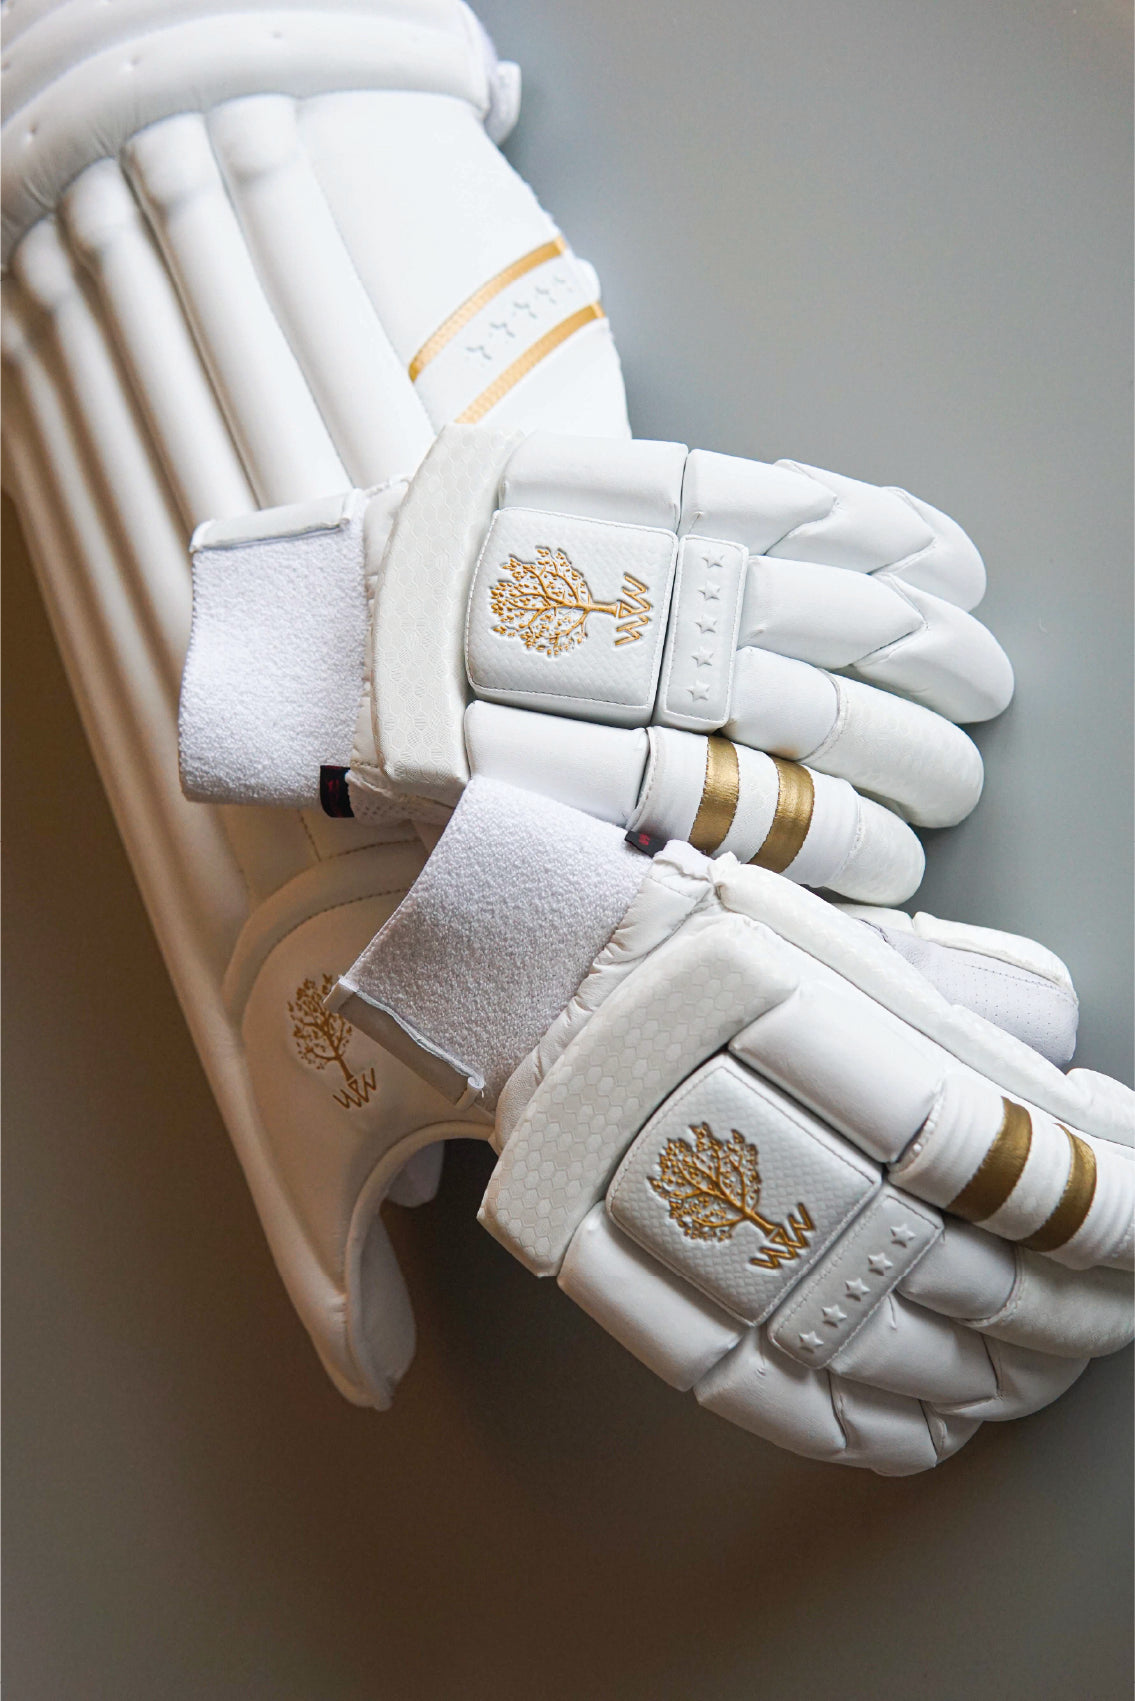 Willow Twin cricket batting gloves contain real leather for protection and durability